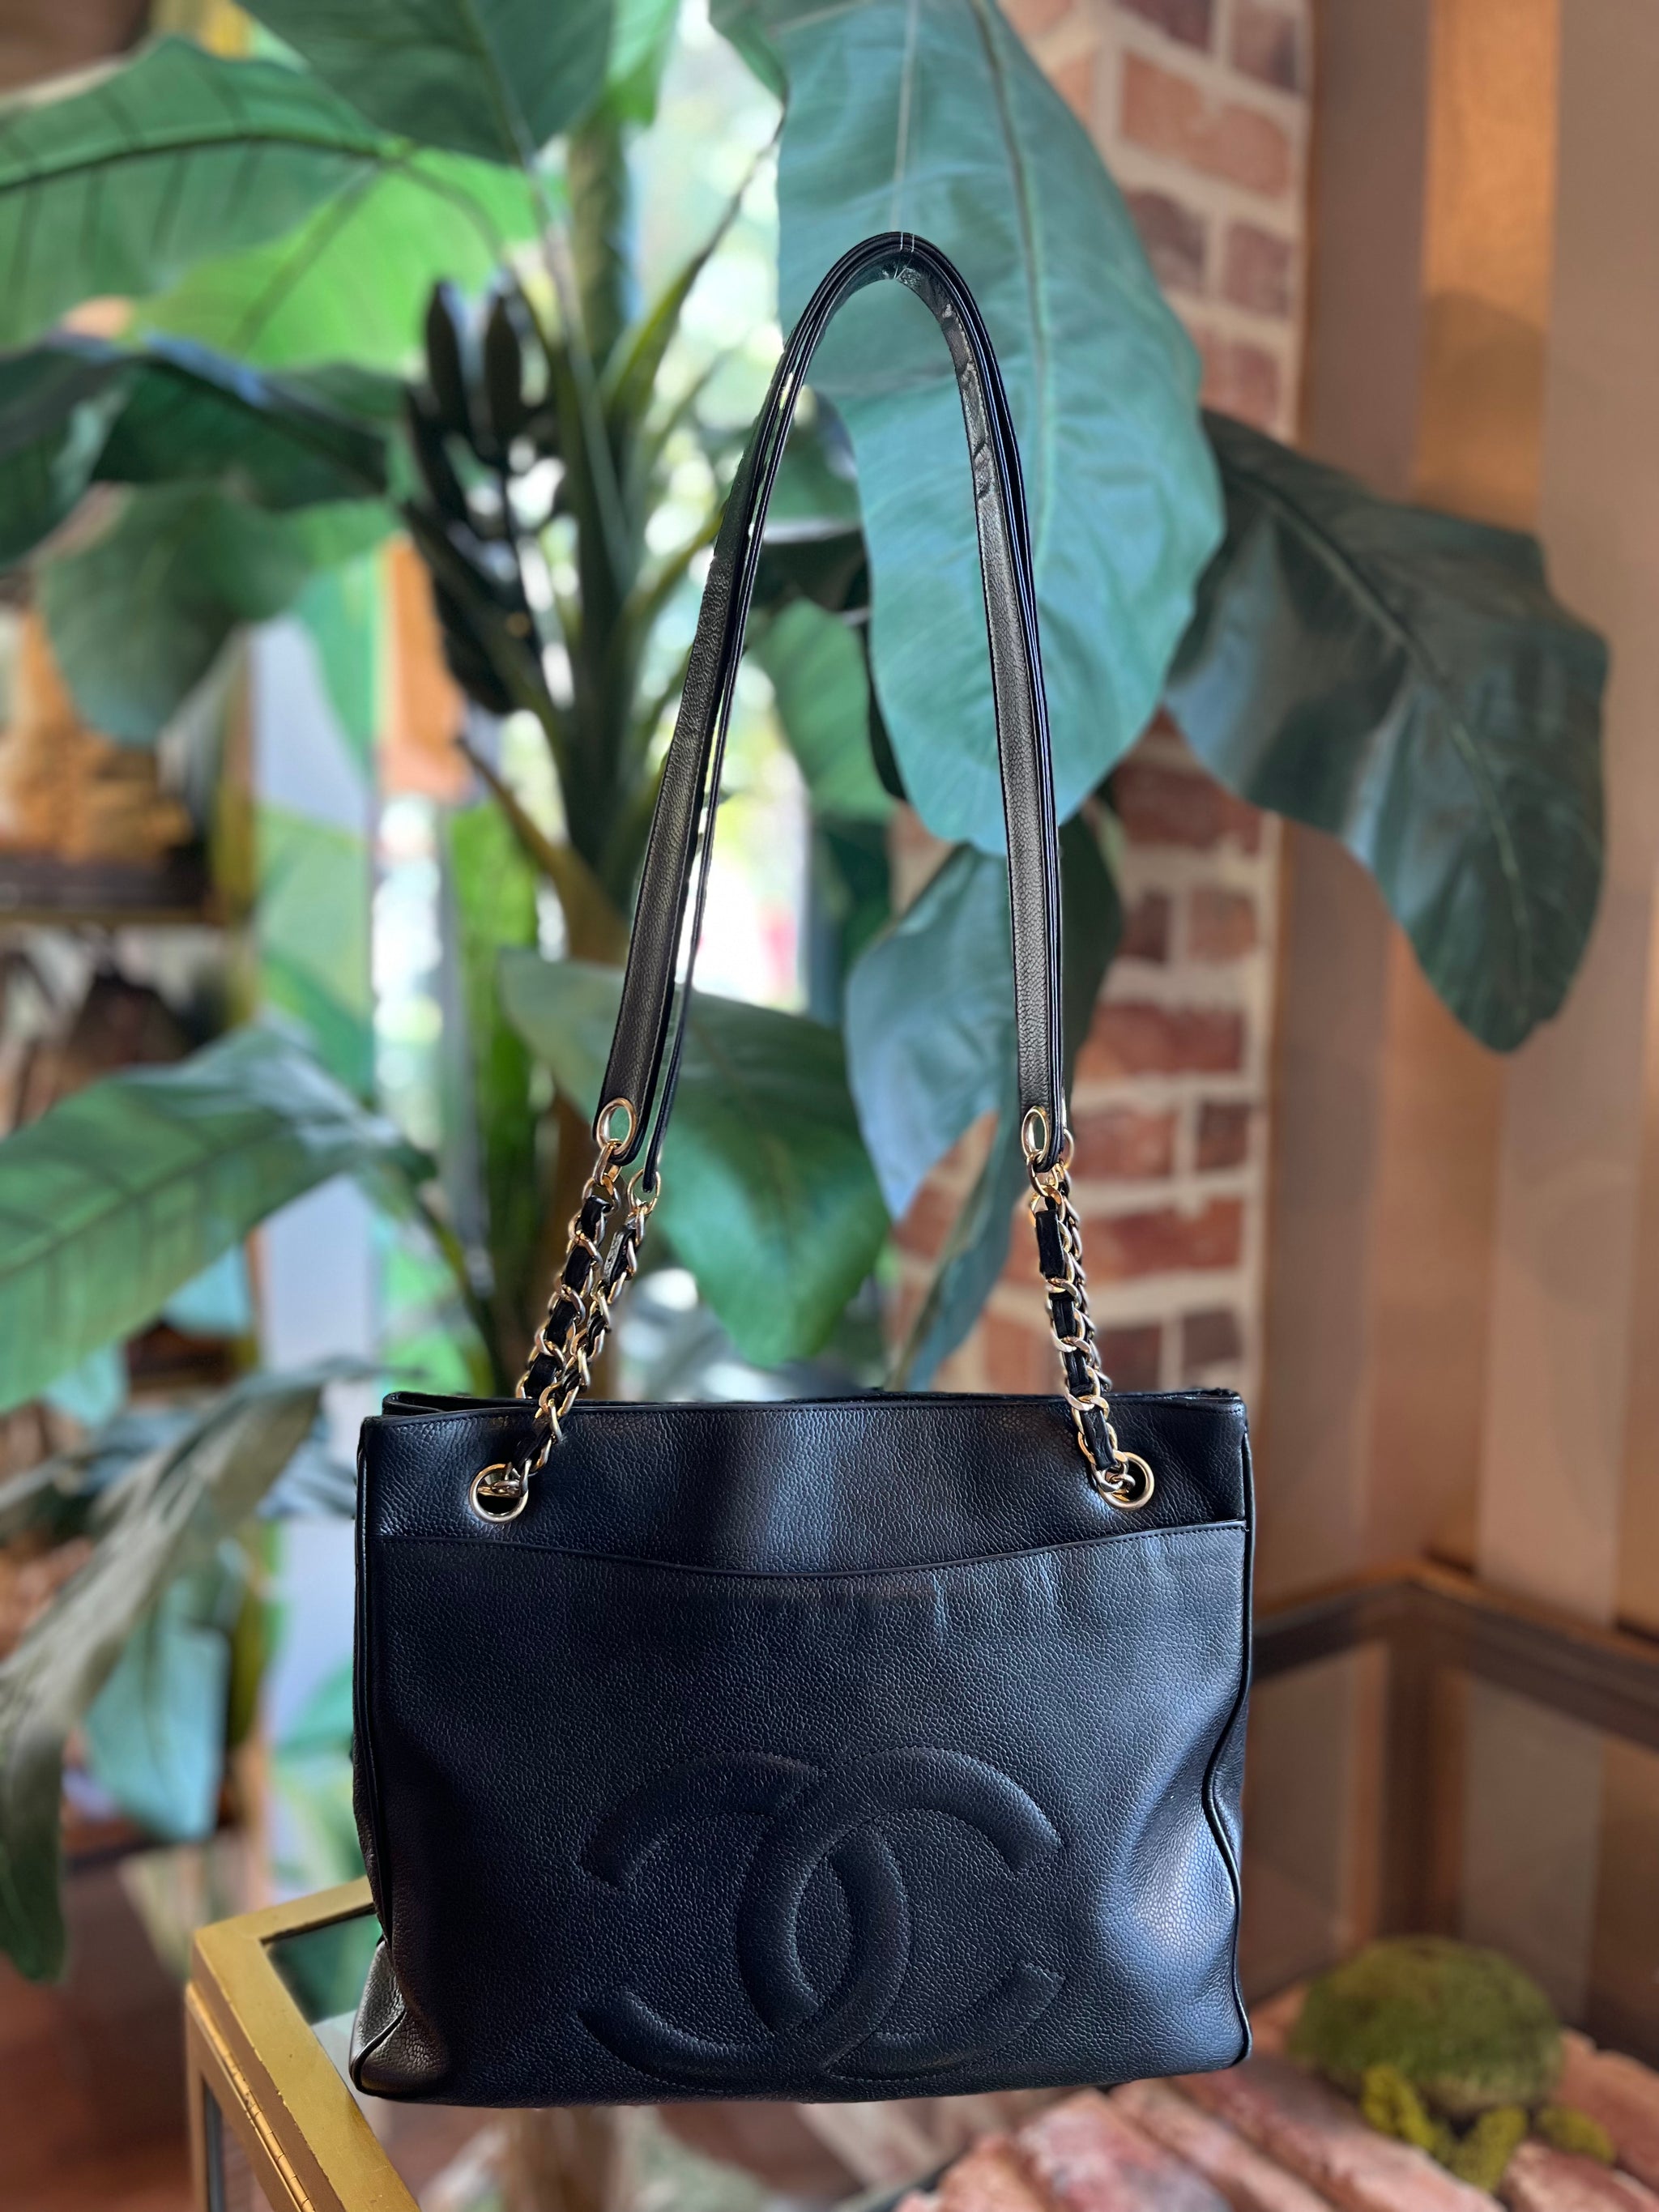 CHANEL Black Leather Front Turnlock Front Pocket Tote - The Purse